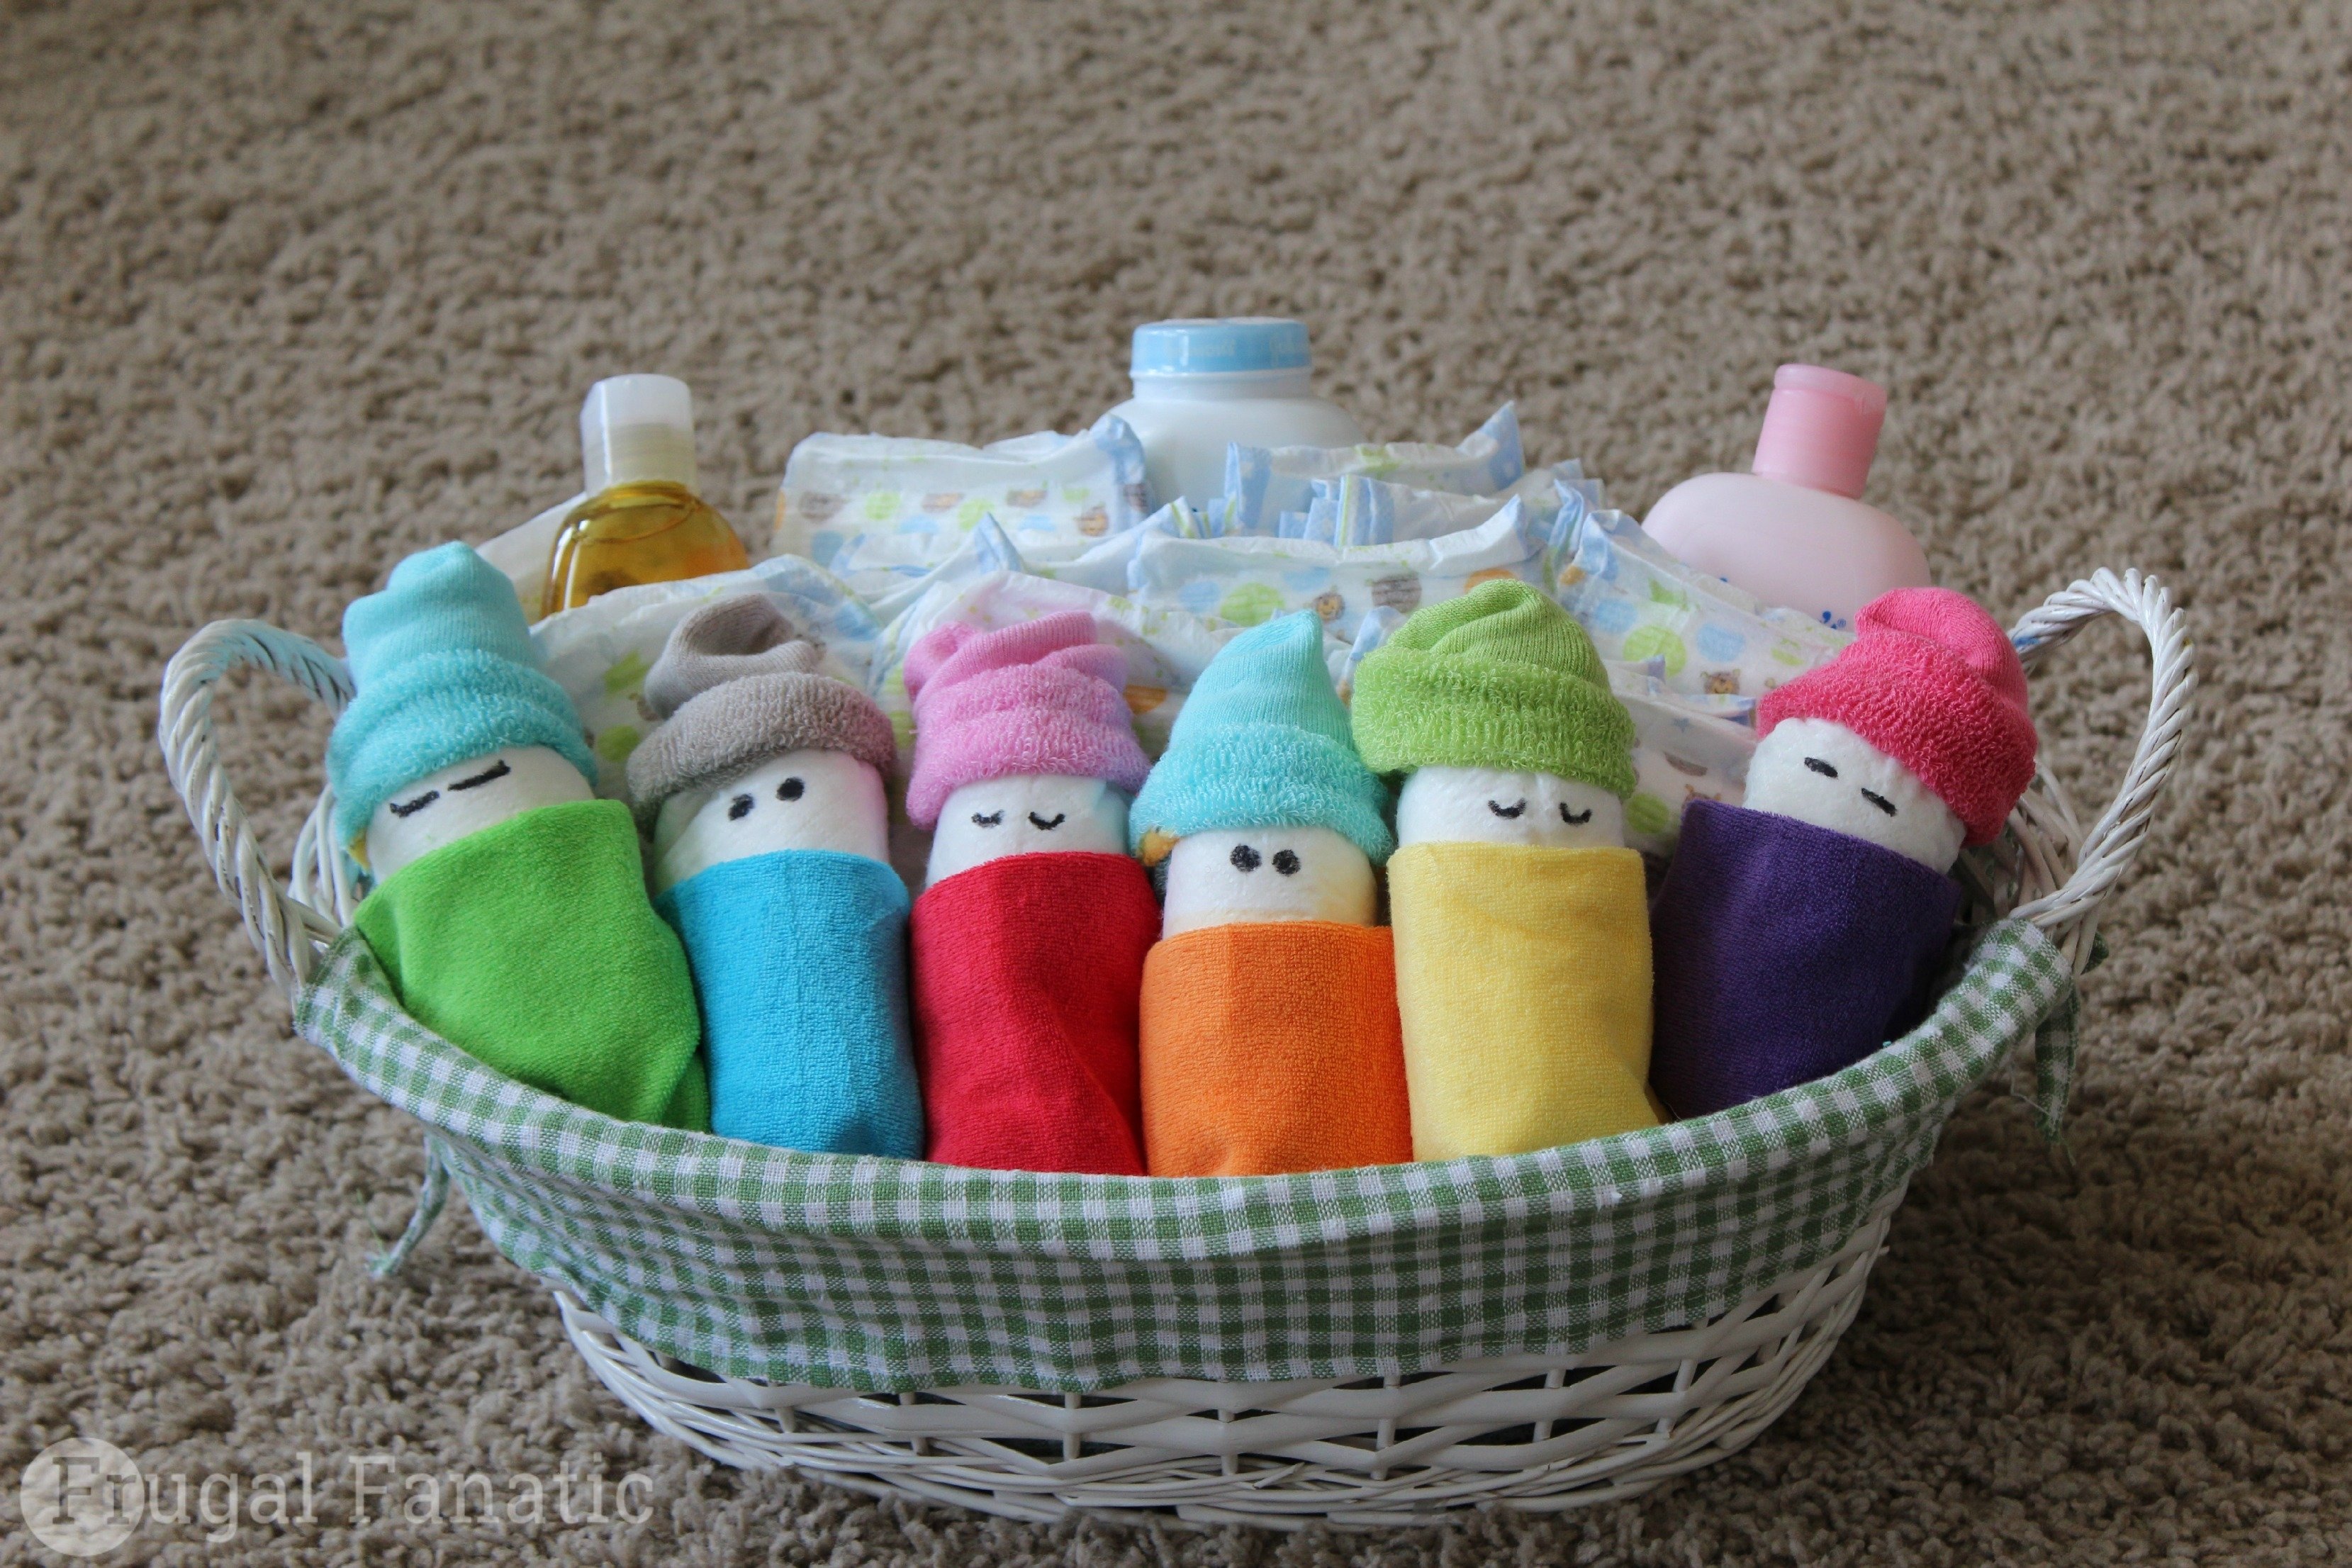 10 Great Gift Ideas For Baby Shower how to make diaper babies easy baby shower gift idea frugal fanatic 5 2022